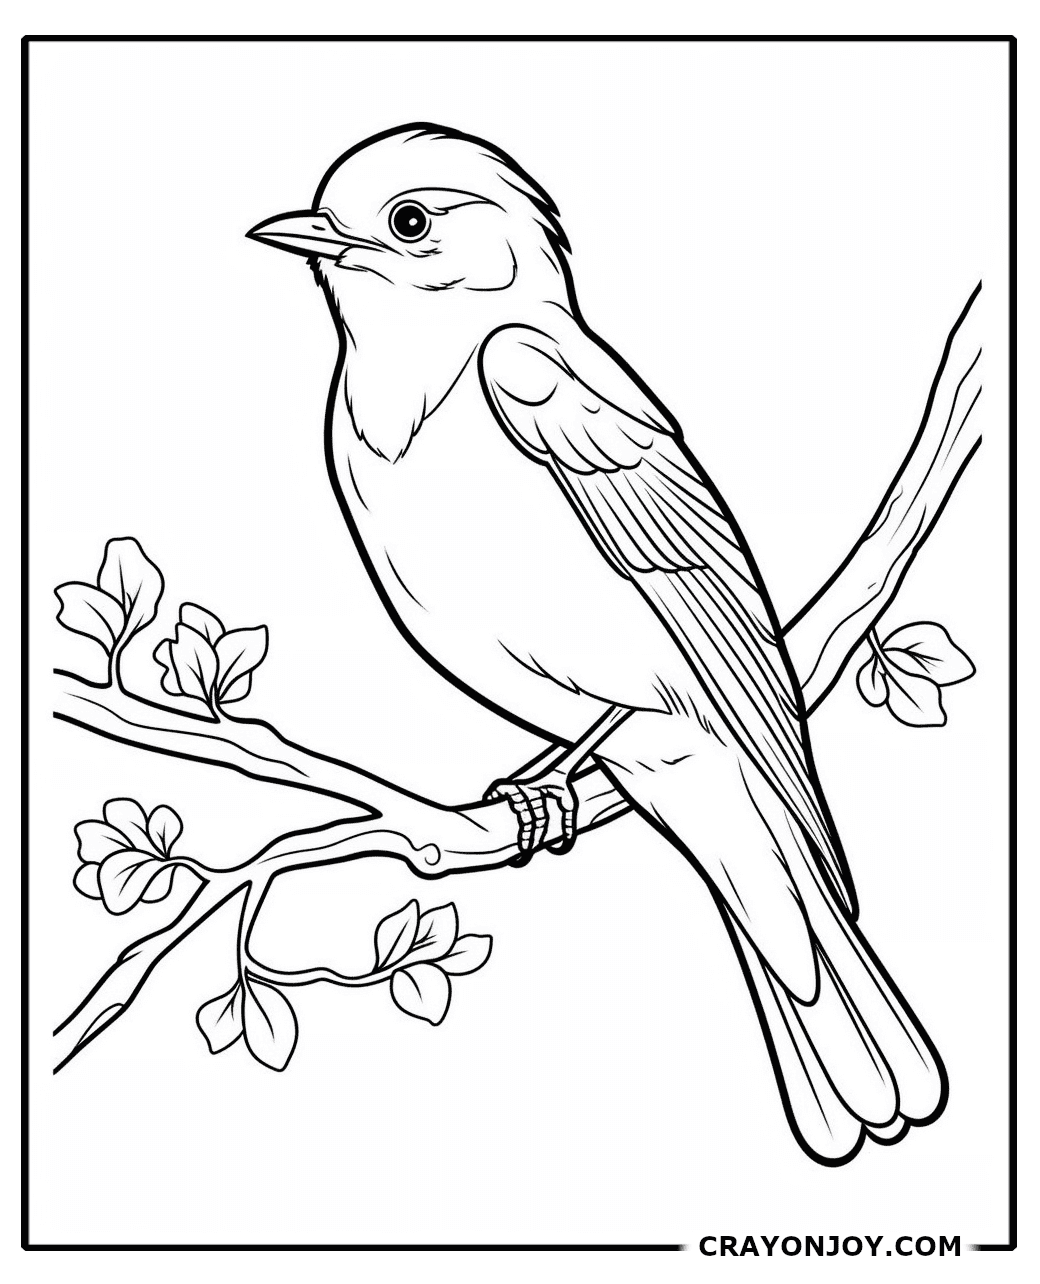 Bluebird Coloring Pages: Fun and Free Printable Sheets for Kids